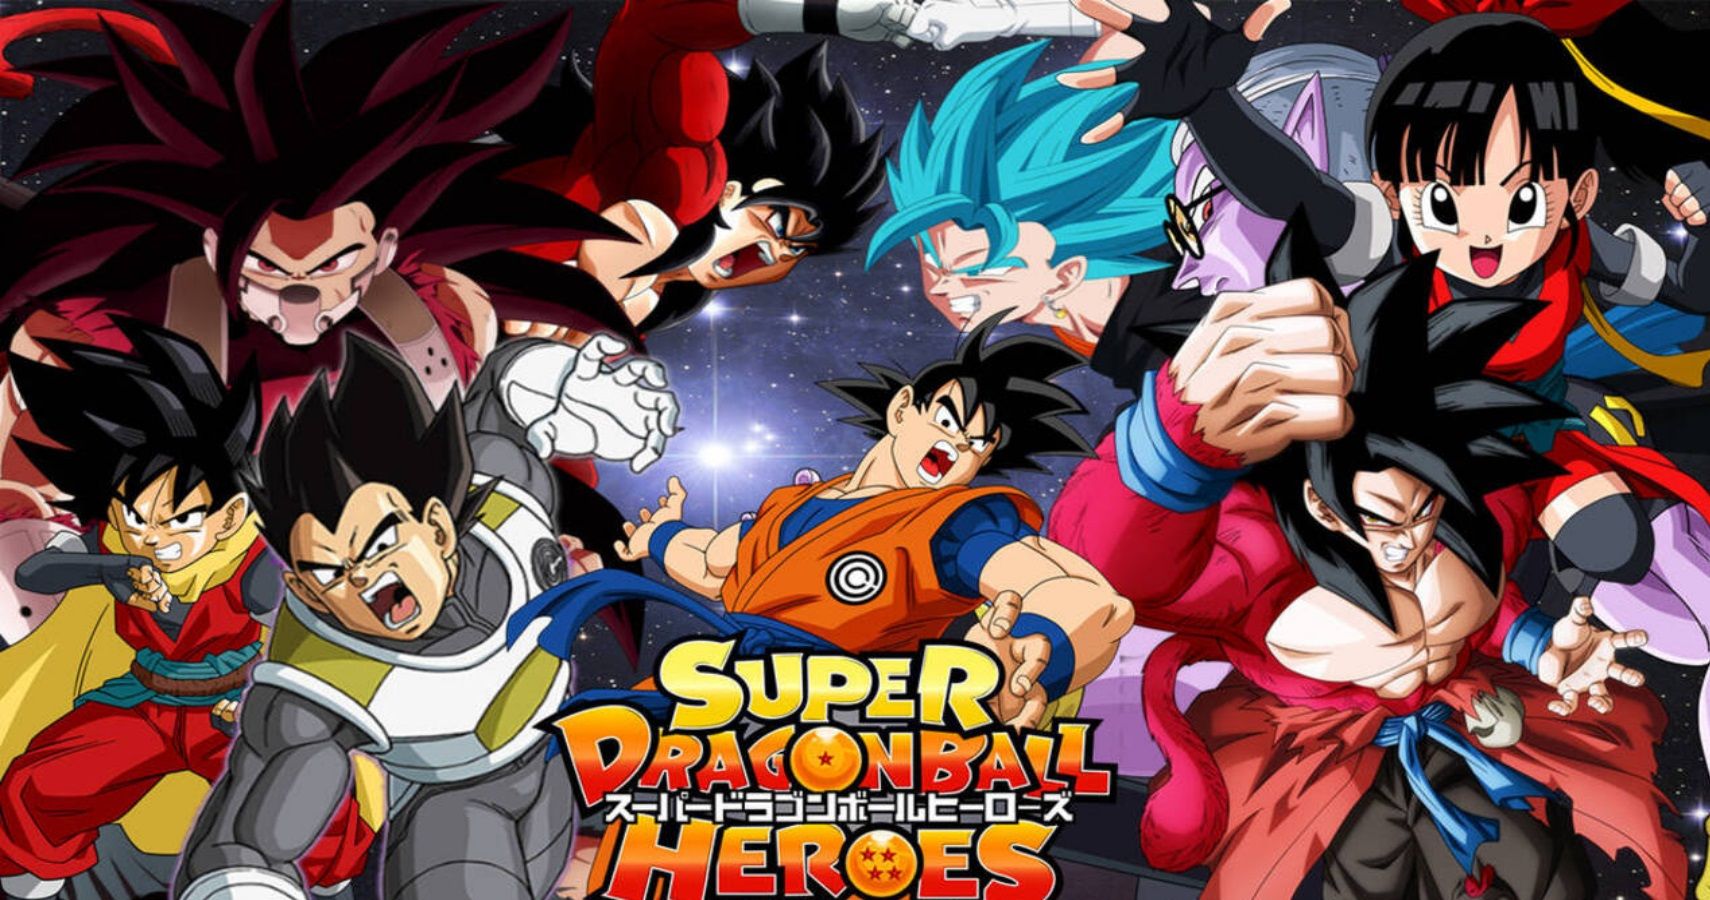 10 Best Things About Dragon Ball Super: Super Hero